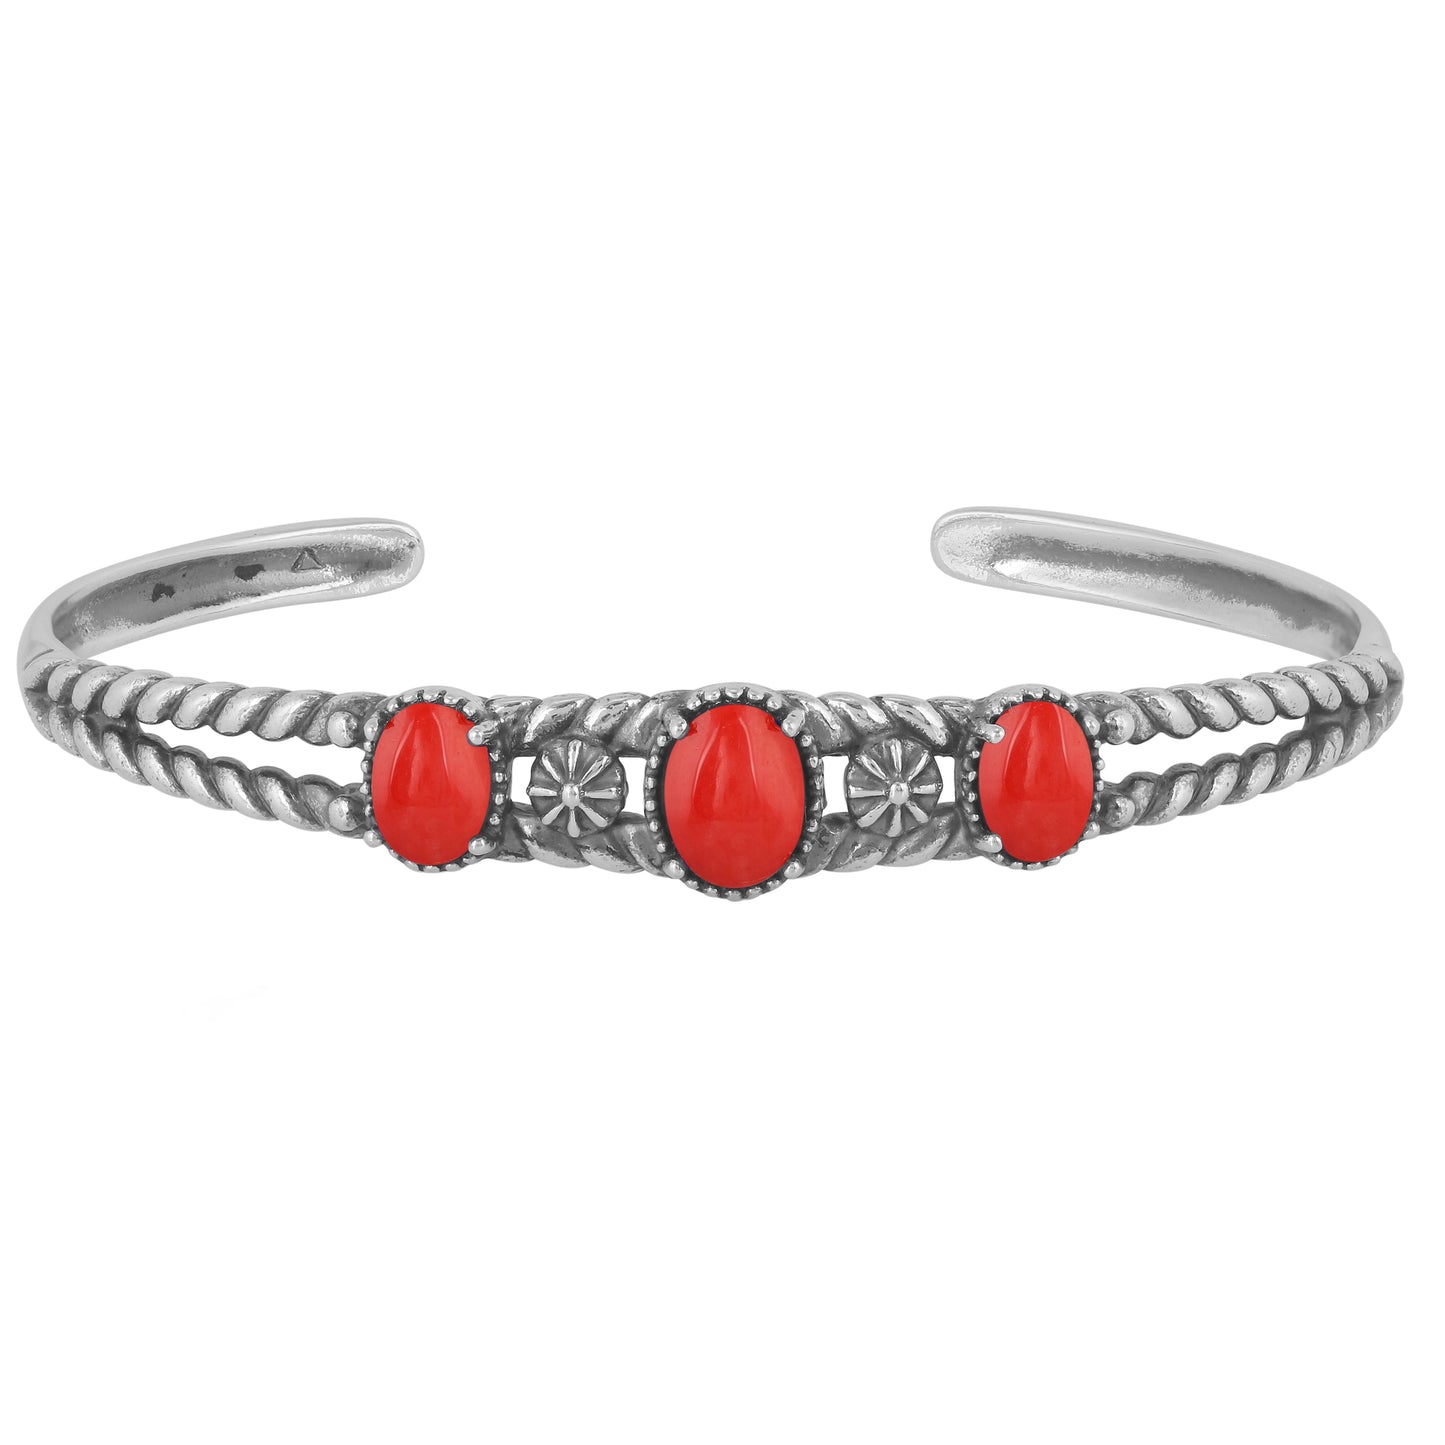 Sterling Silver Genuine Coral 3 Stone Cuff Bracelet Size Small - Large